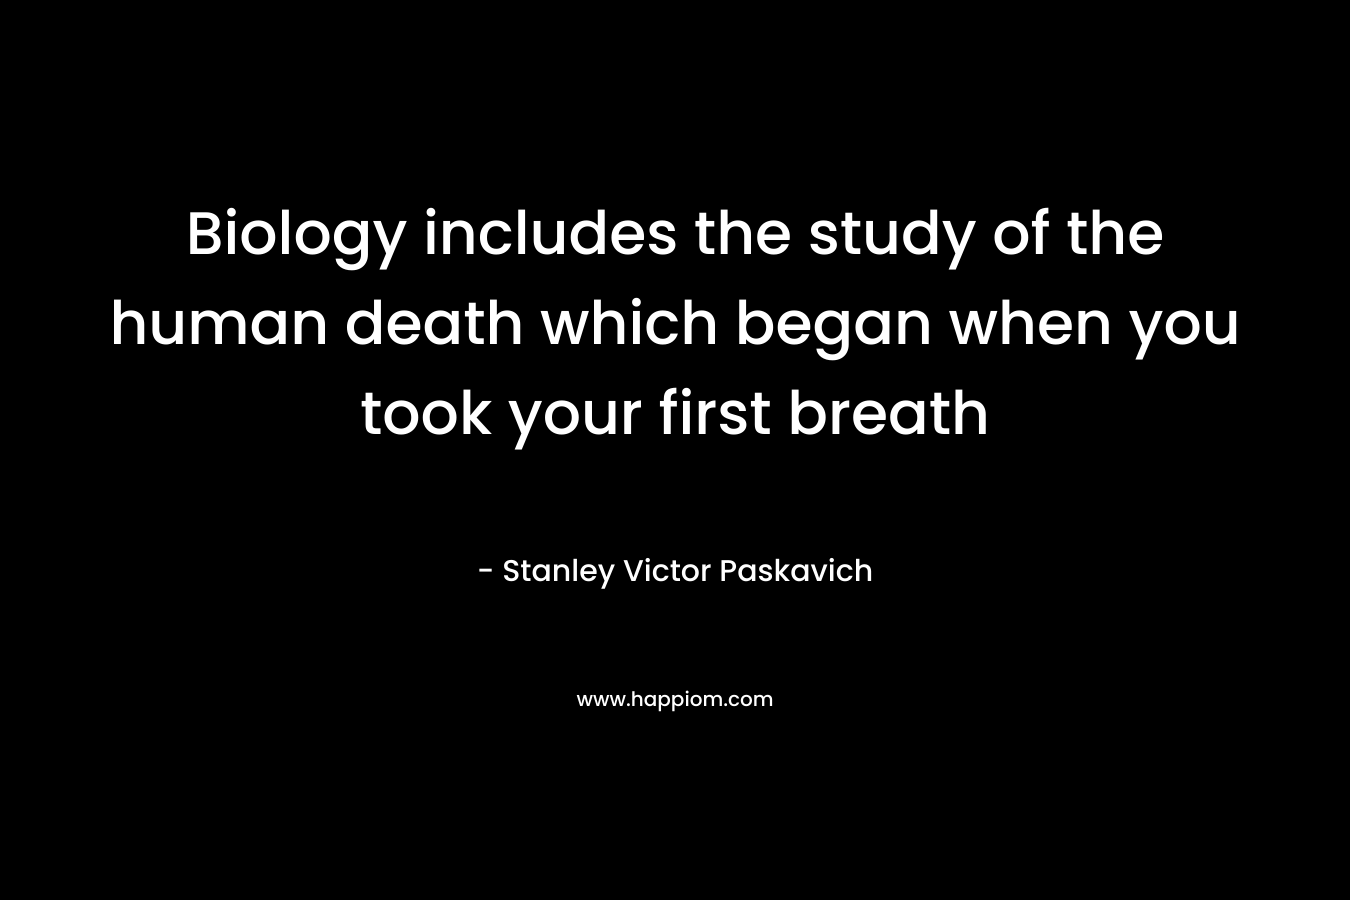 Biology includes the study of the human death which began when you took your first breath – Stanley Victor Paskavich